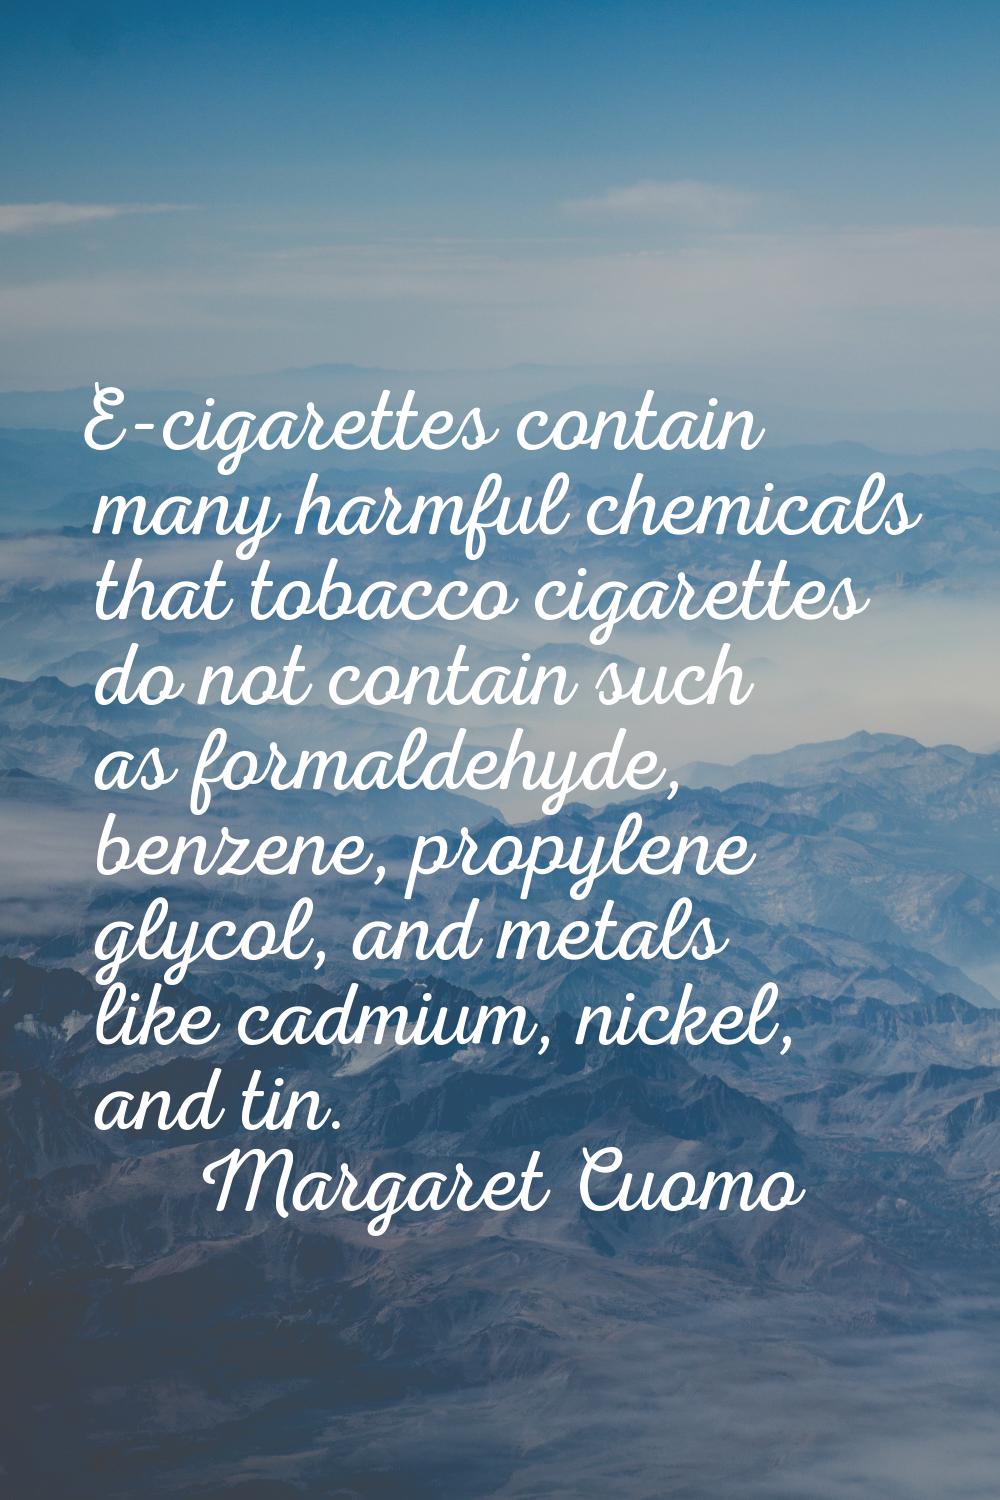 E-cigarettes contain many harmful chemicals that tobacco cigarettes do not contain such as formalde